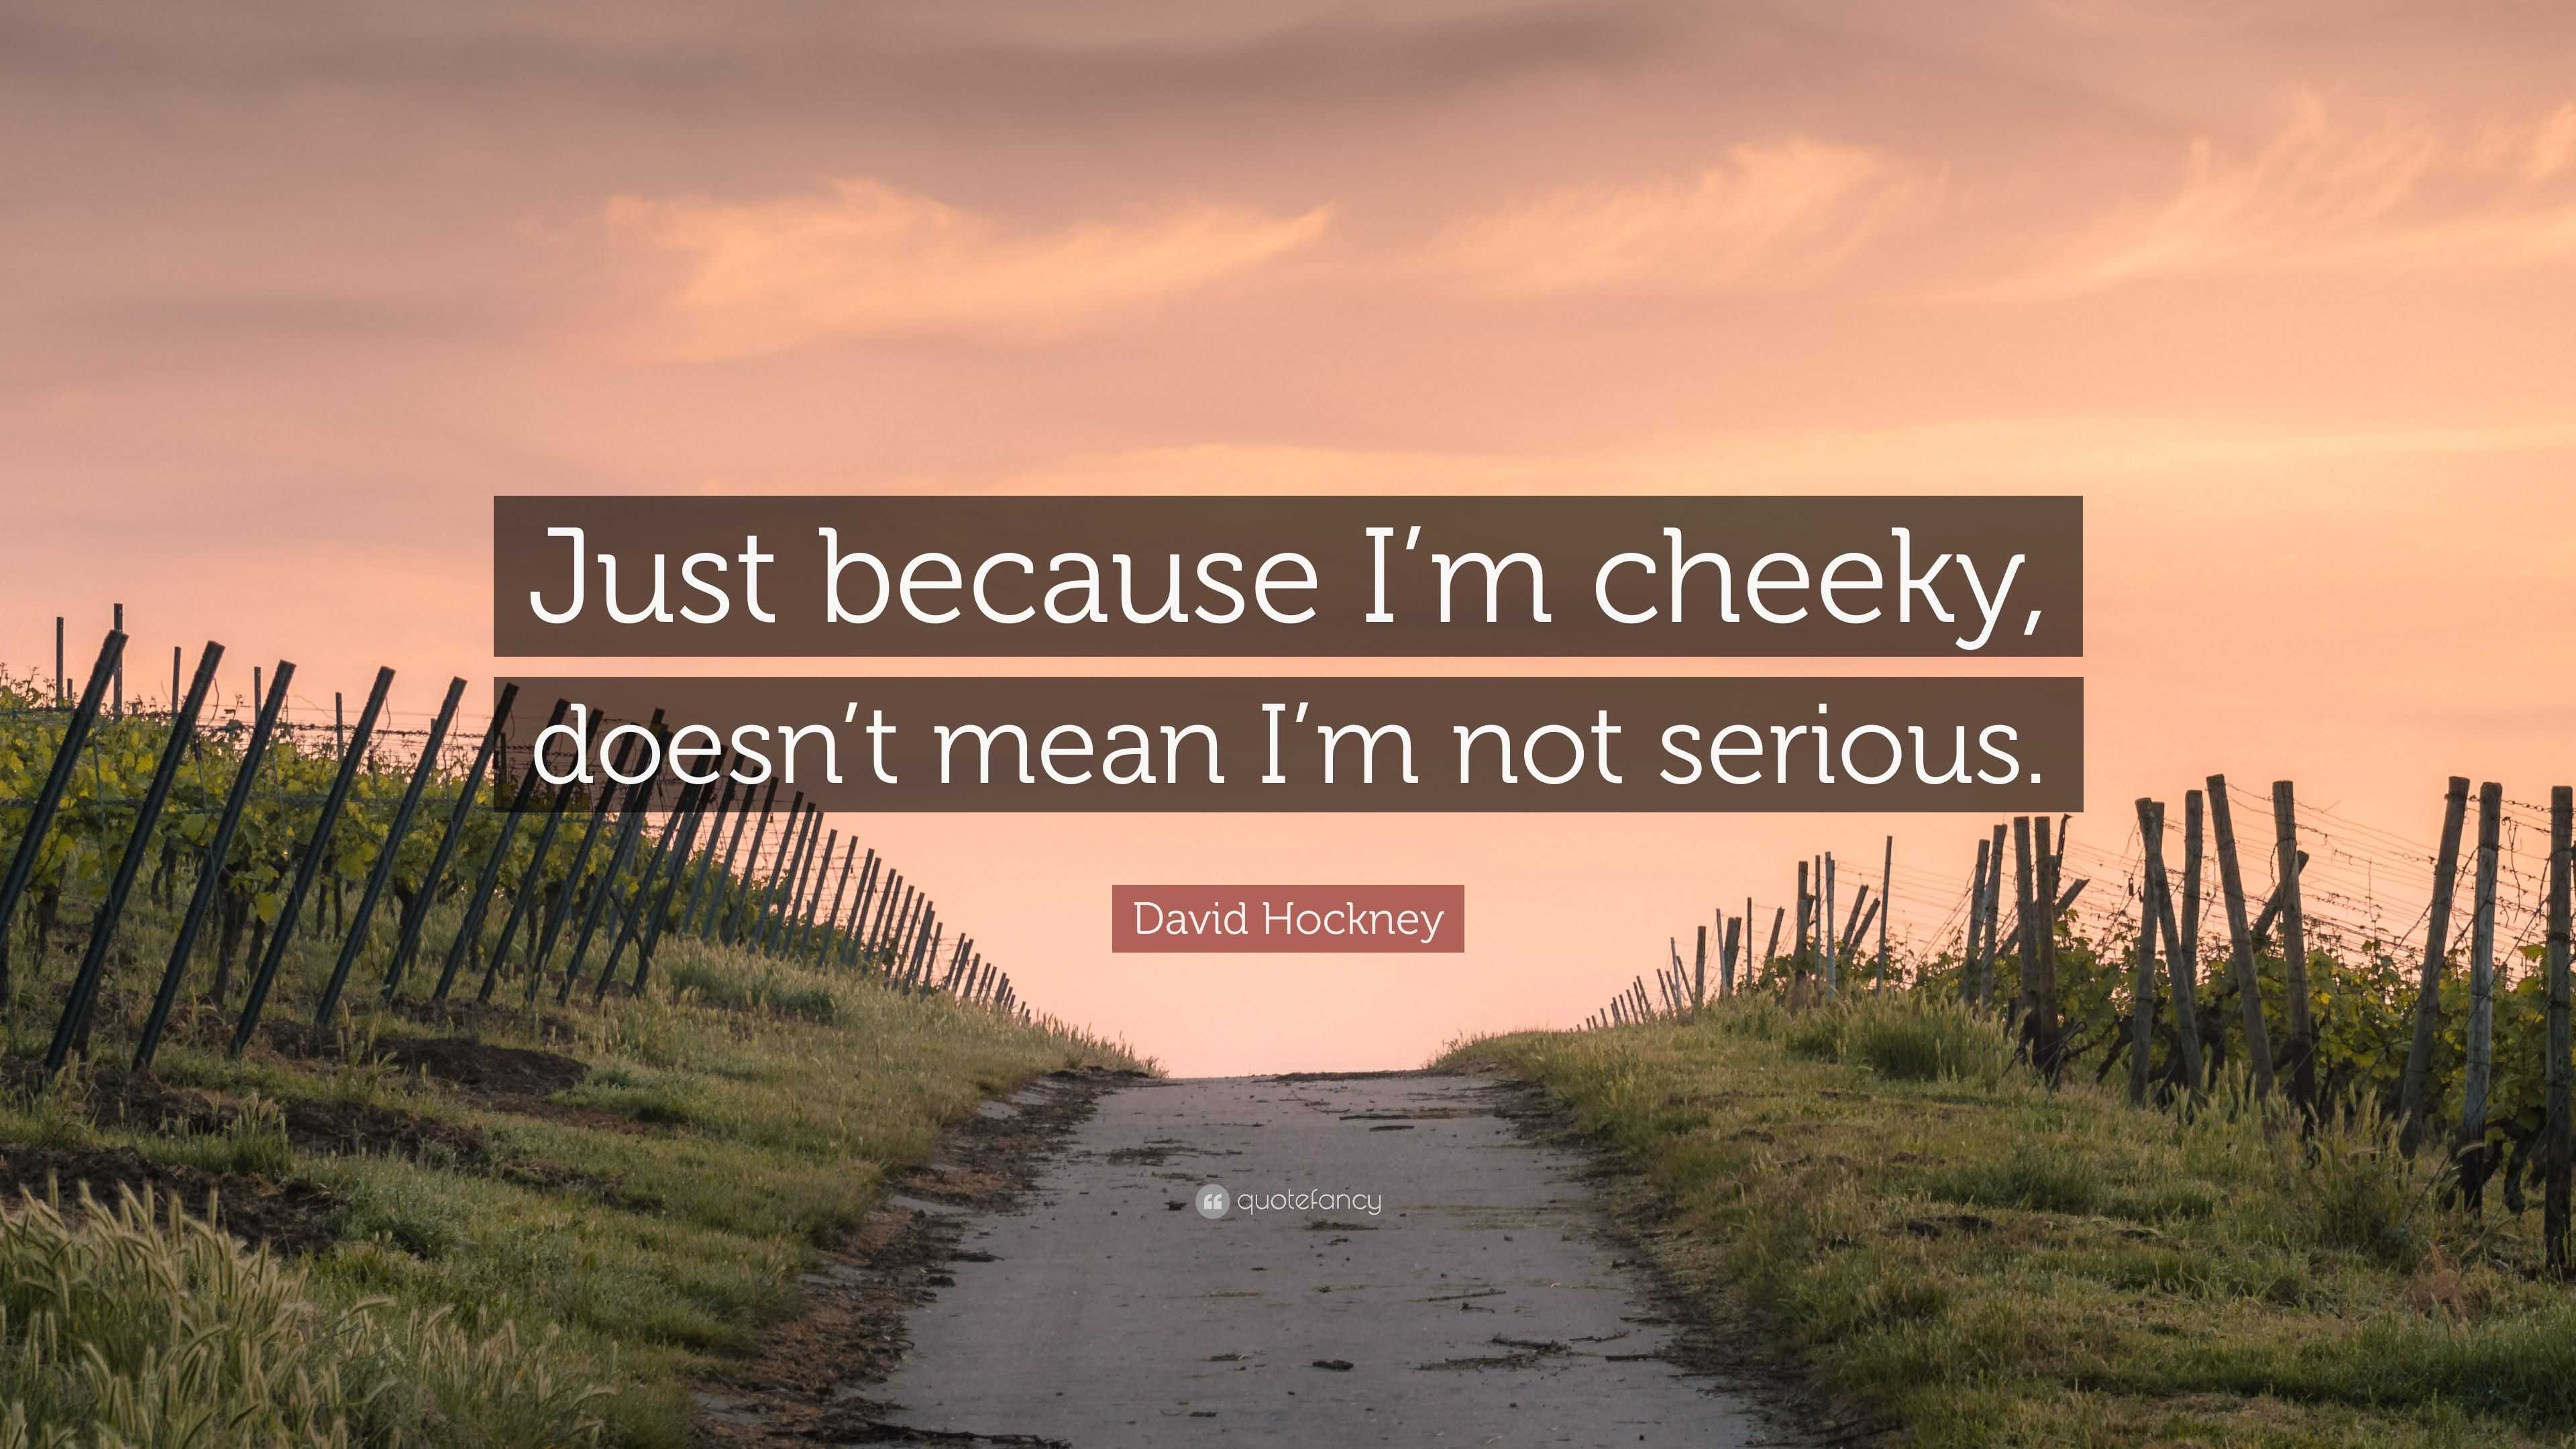 David Hockney Quote: “Just because I'm cheeky, doesn't mean I'm